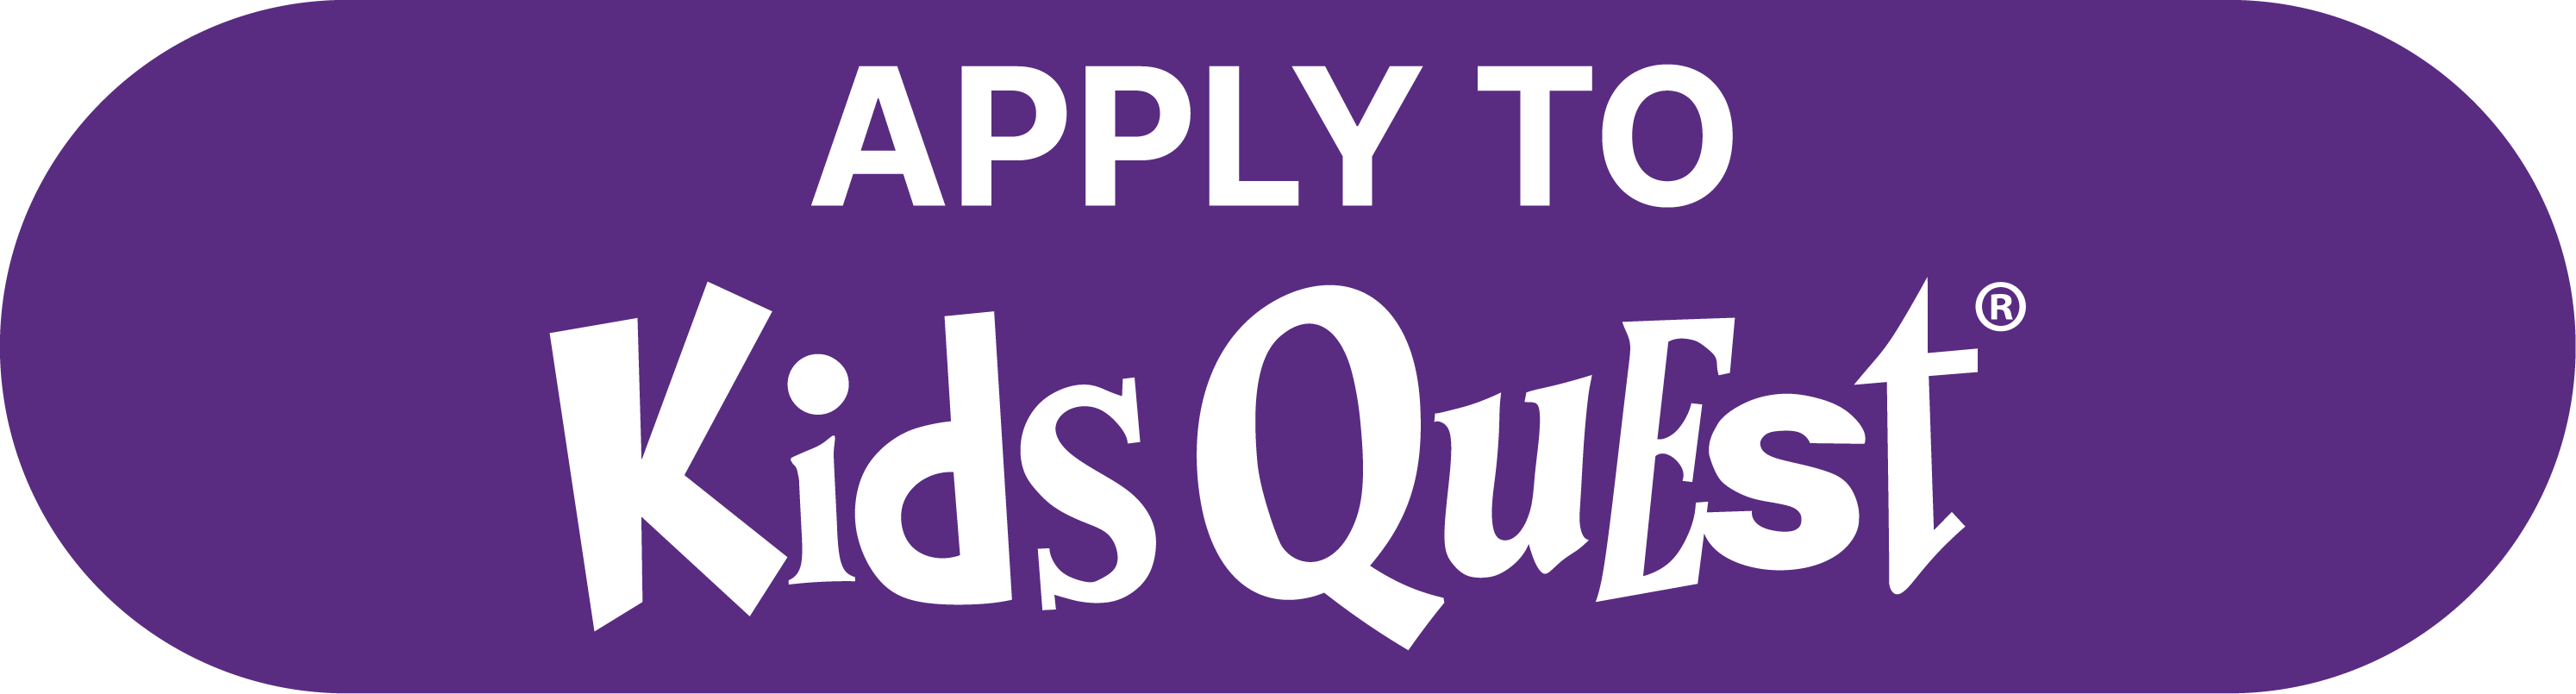 Apply to Kids Quest